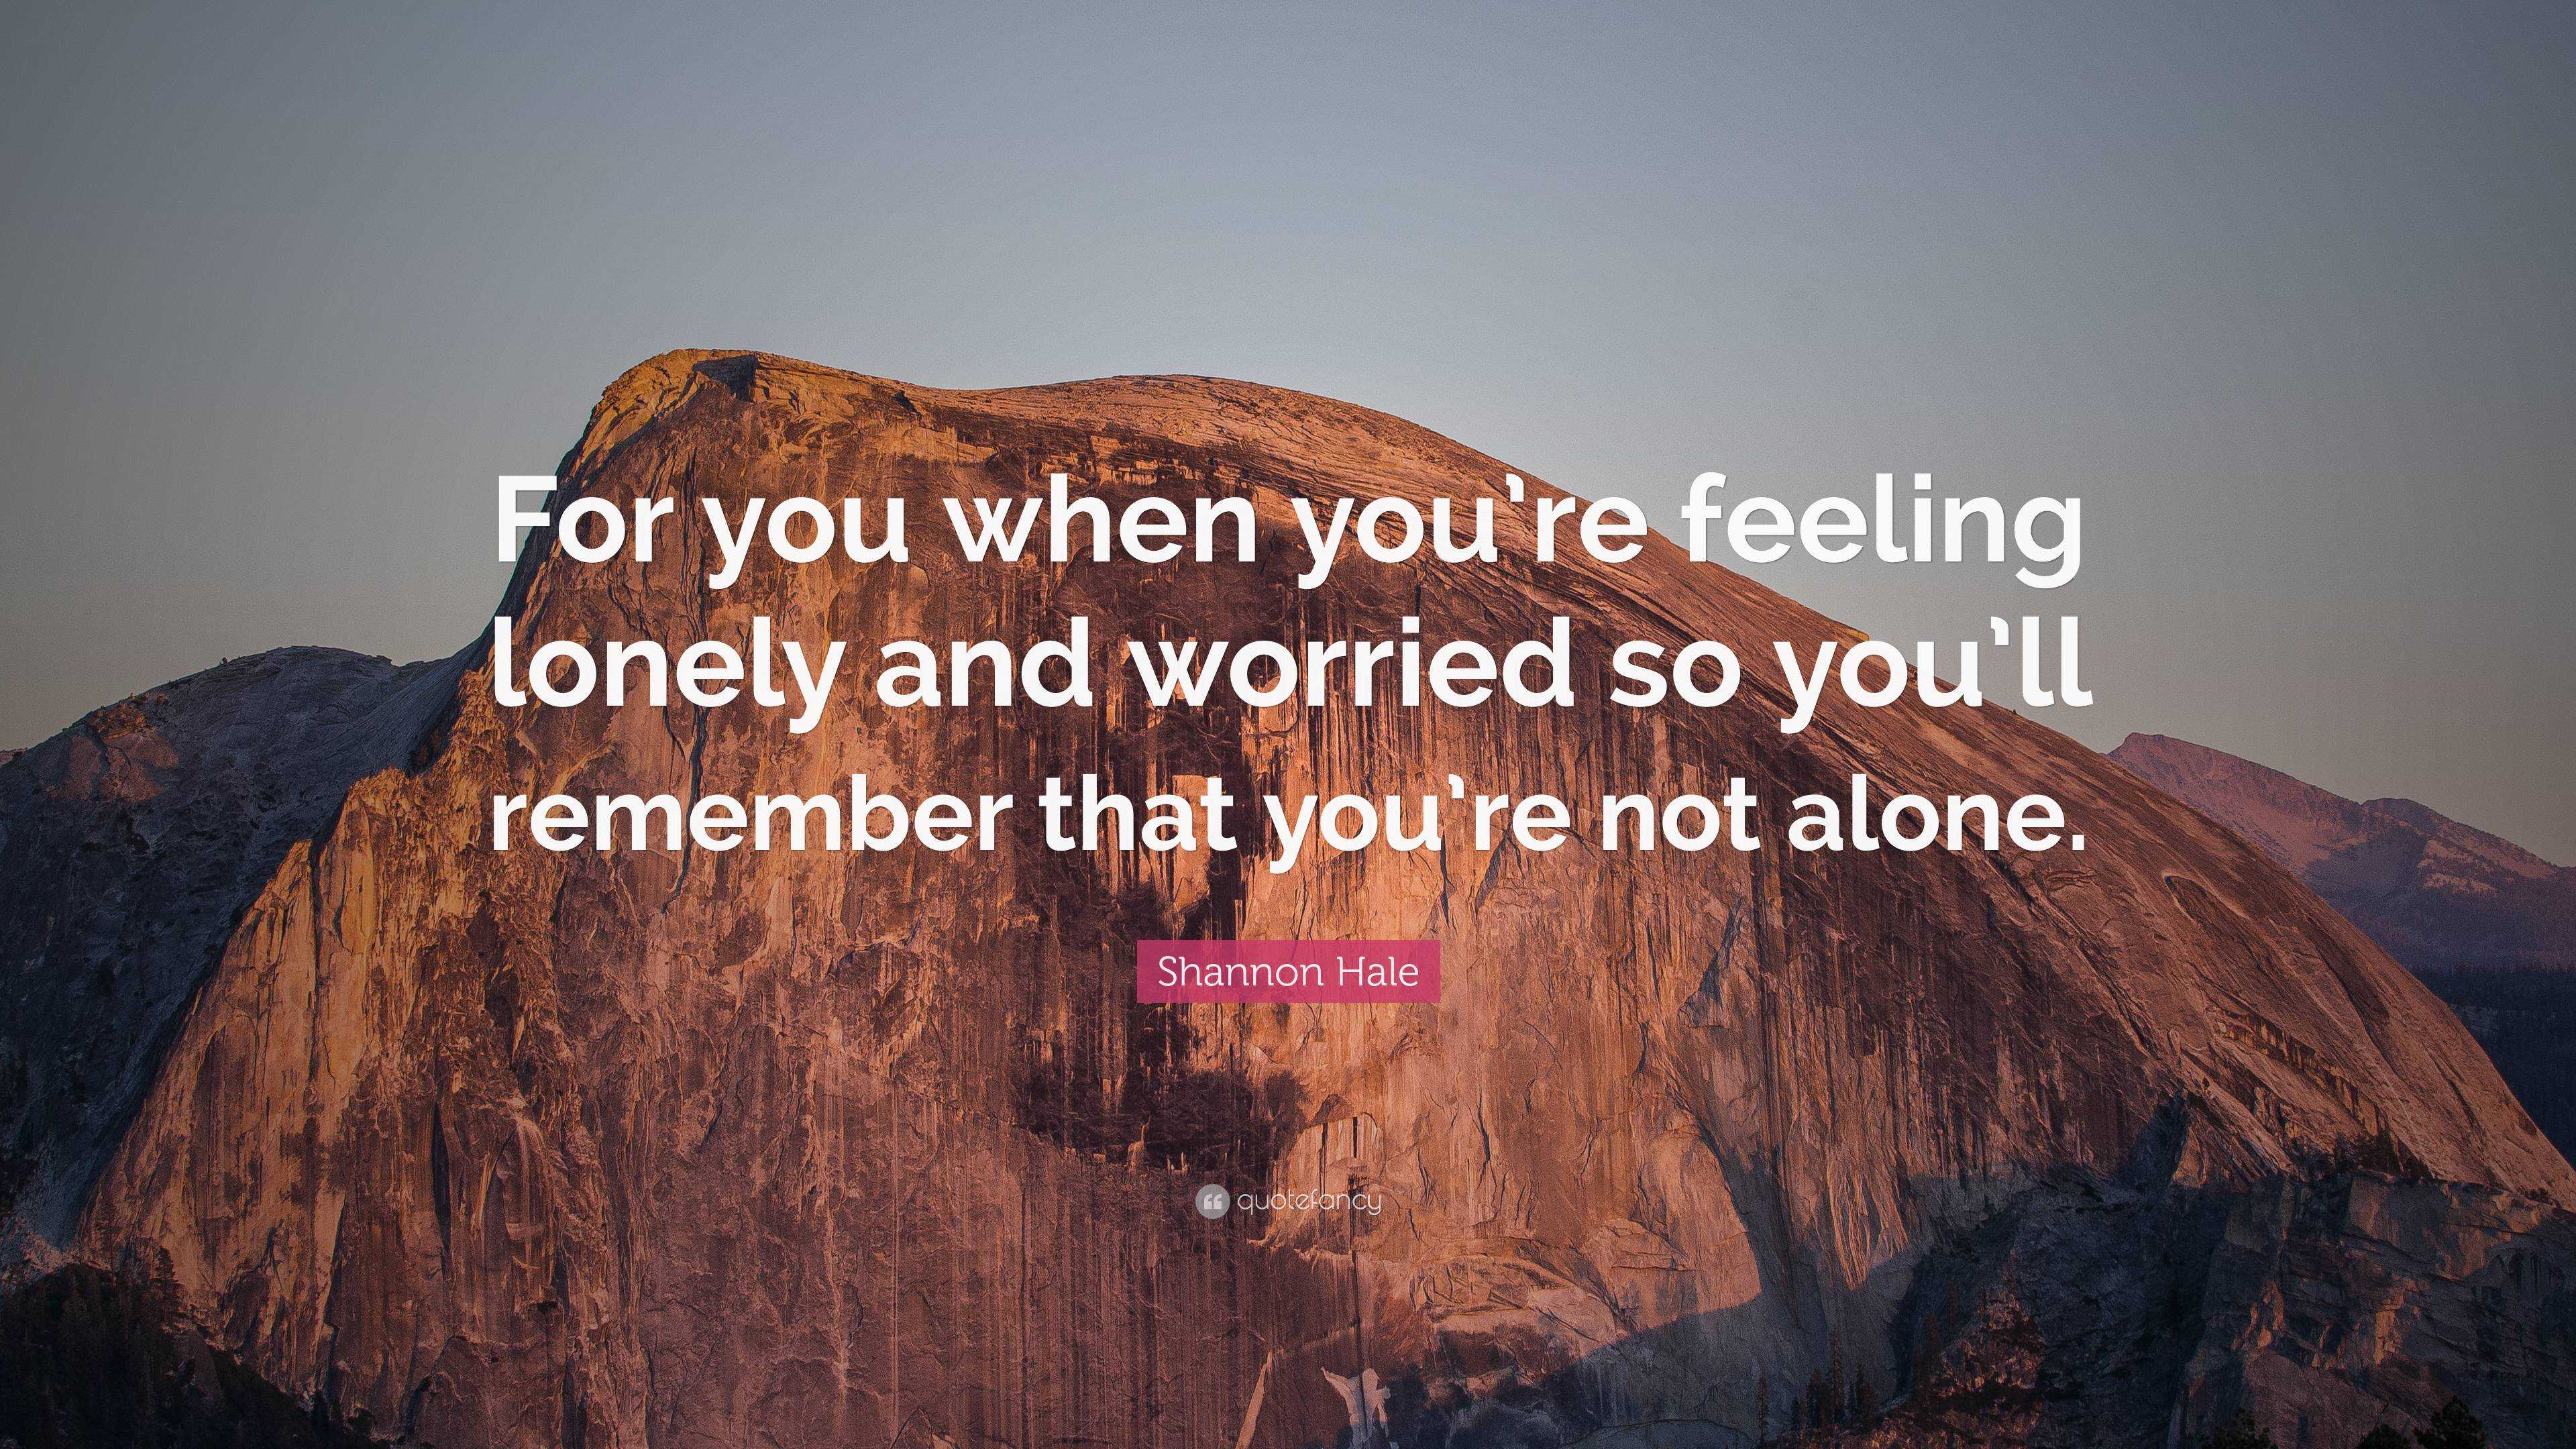 You're Not Alone in Feeling Lonely